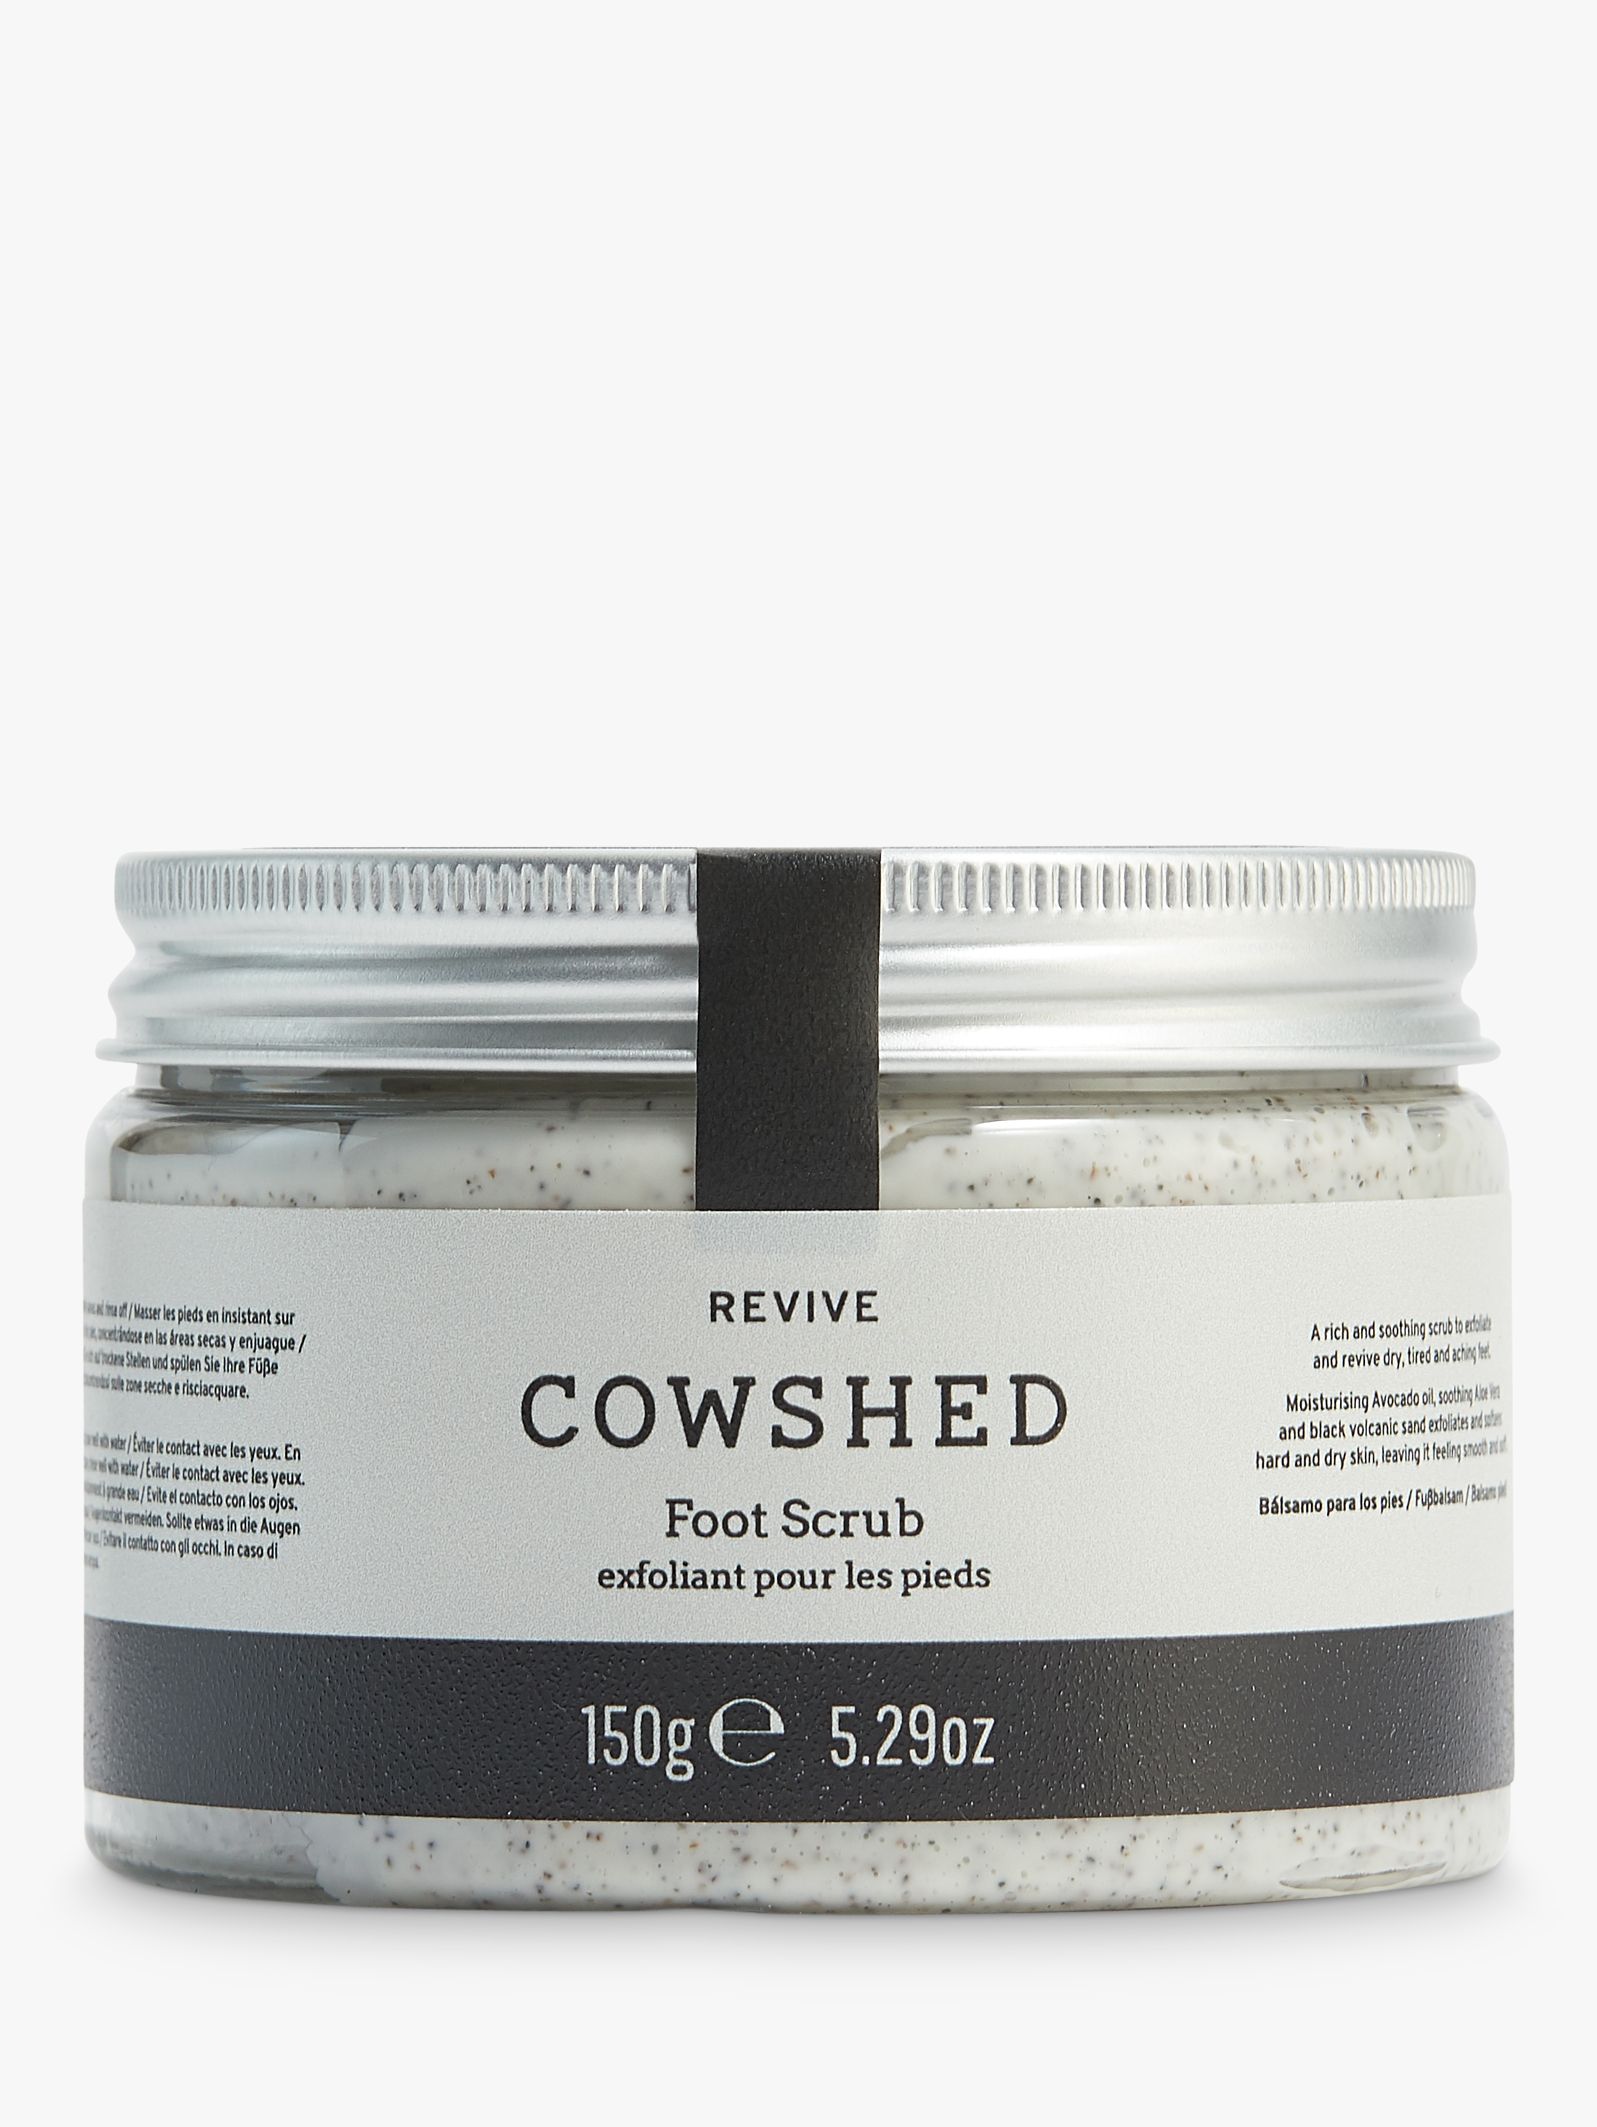 Cowshed Revive Foot Scrub, 150g 1